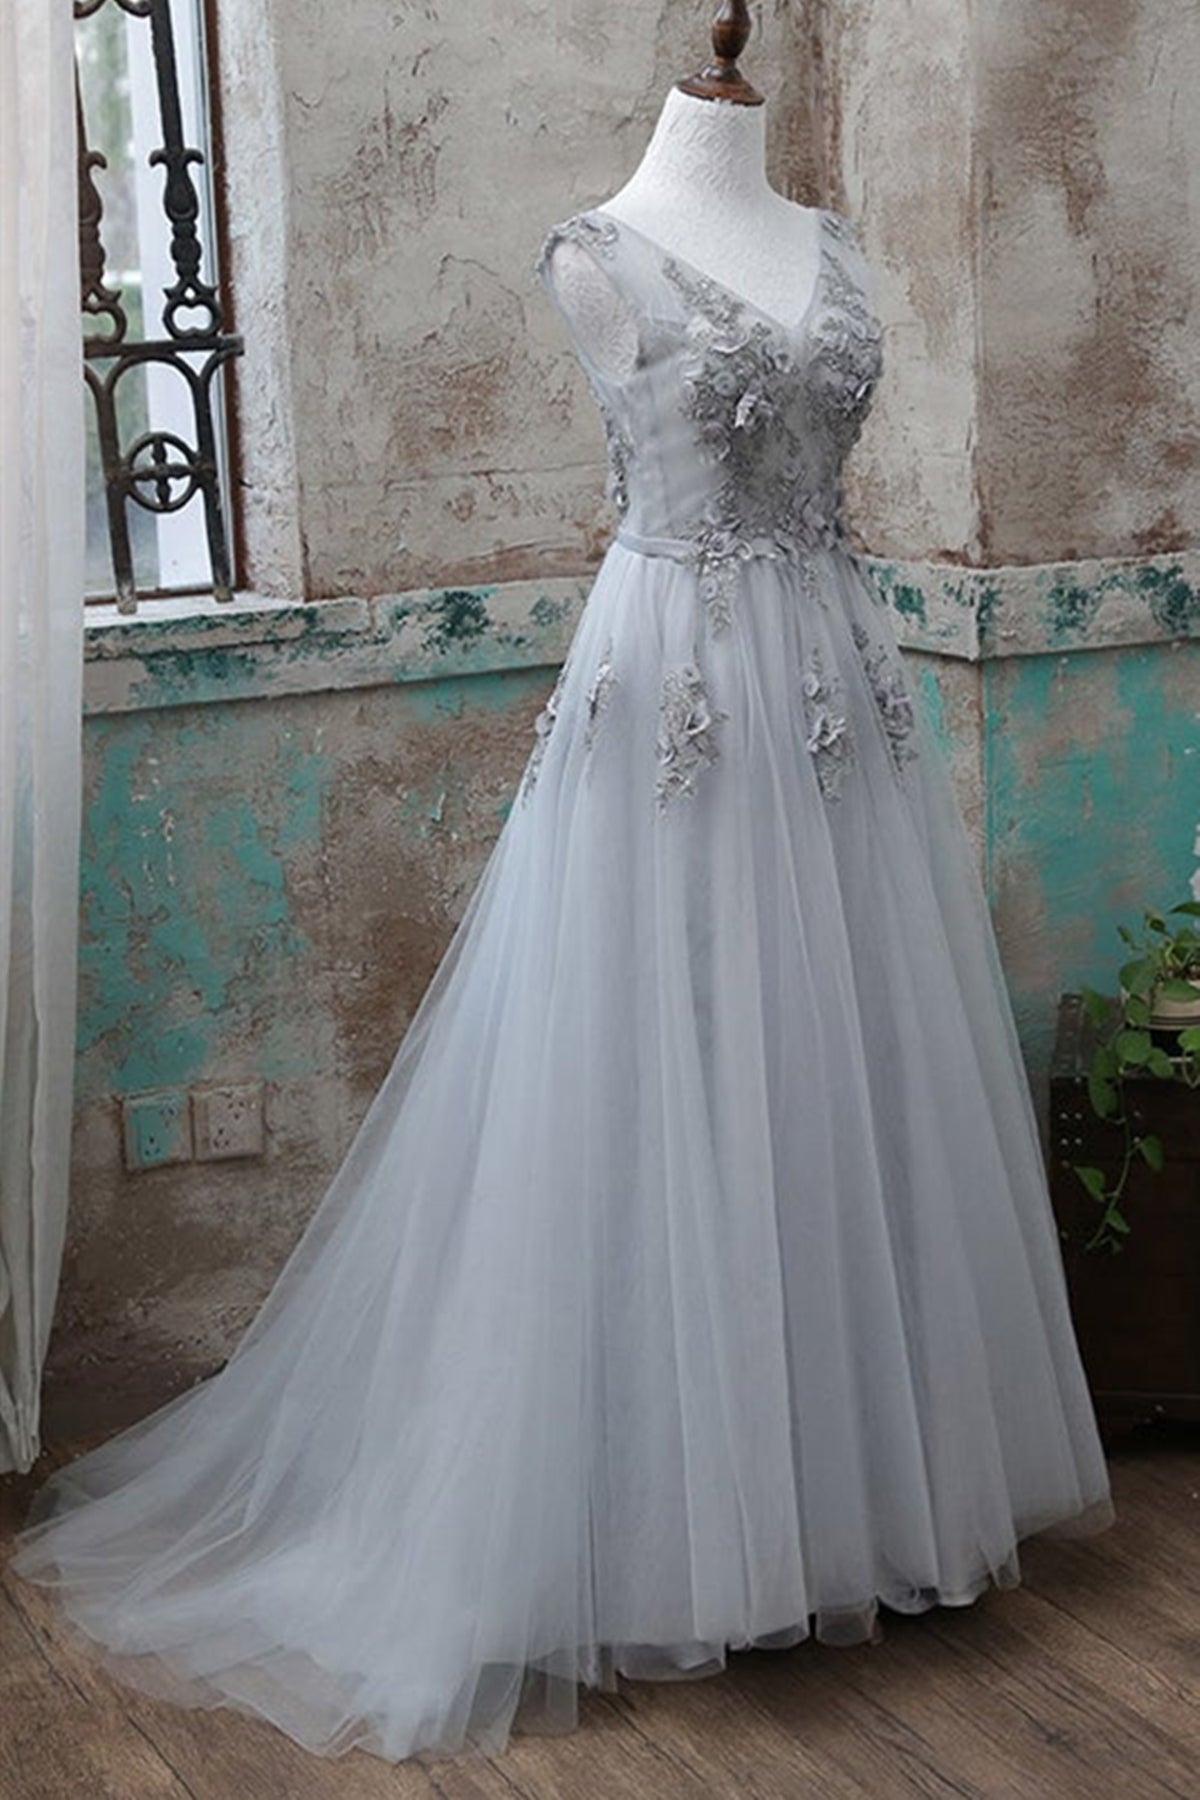 Grey V-neckline Tulle with Lace Long Formal Dress, Grey A-line Prom Dress